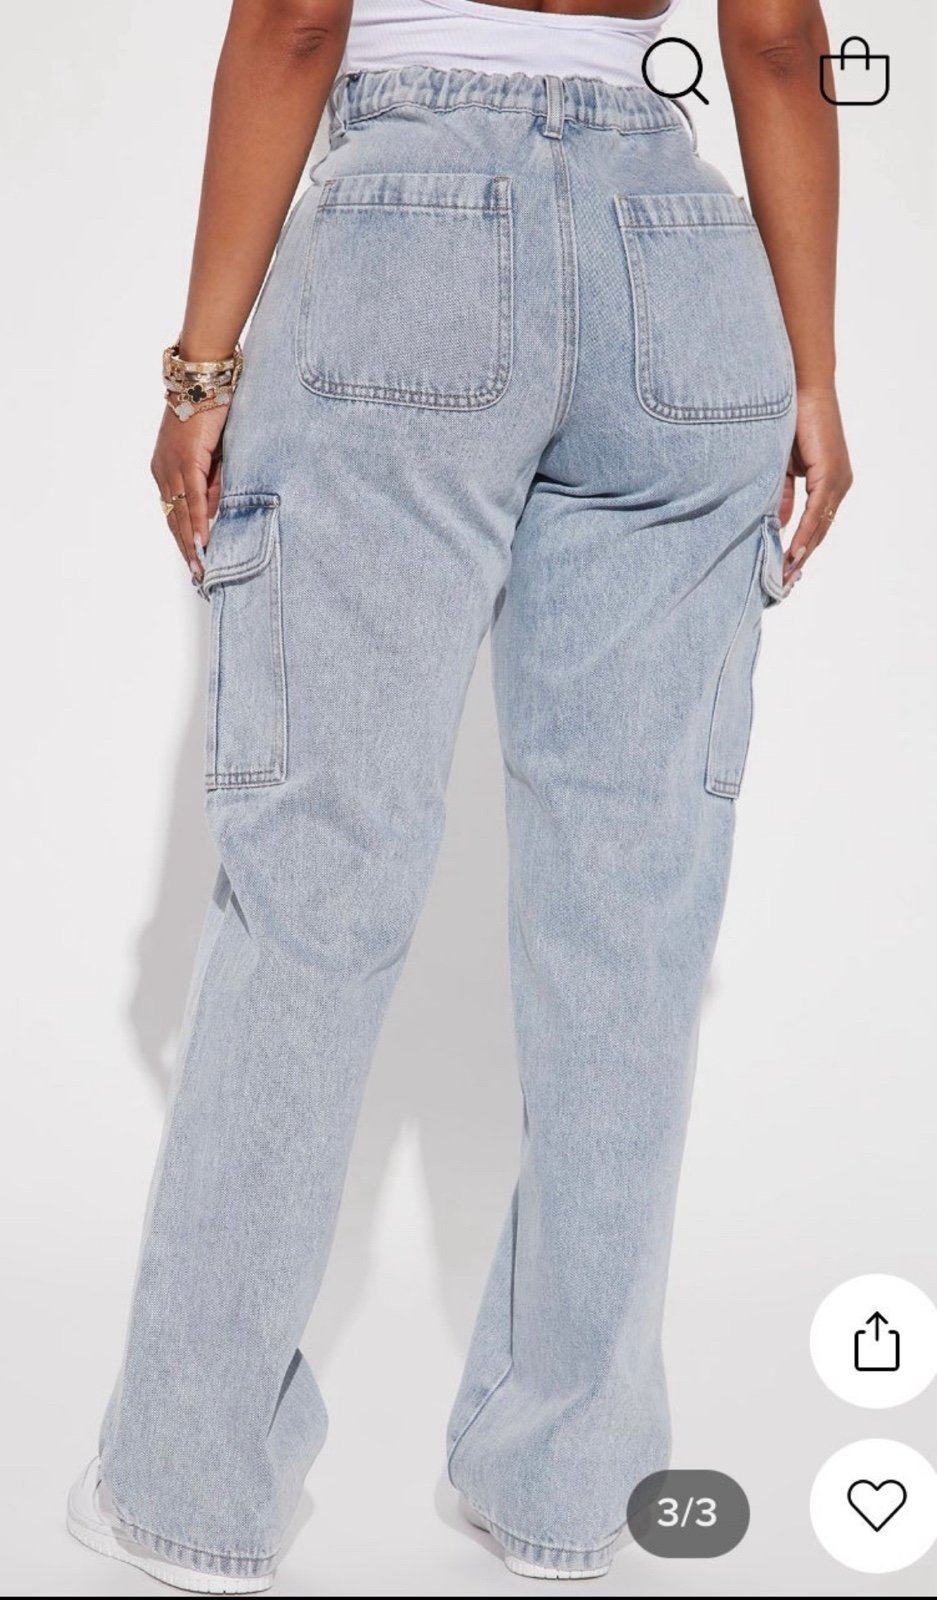 large selection Cargo jeans osGCpw3fI on sale